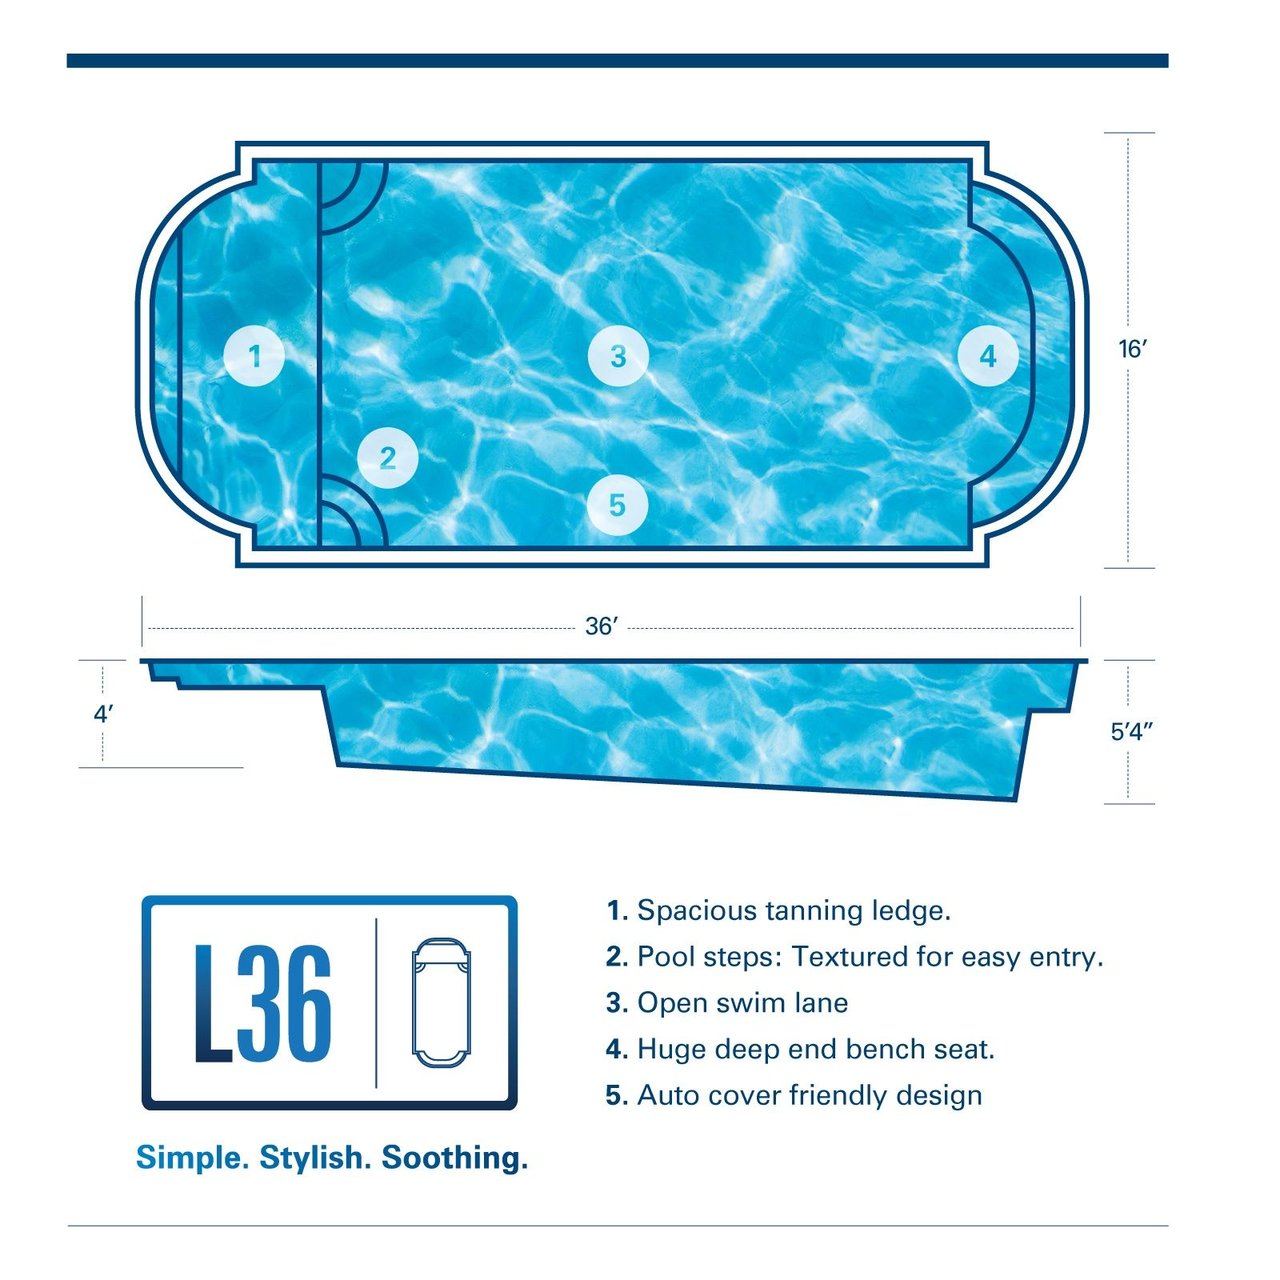 How To Install A Fiberglass Pool With A Tanning Ledge—the Right Way